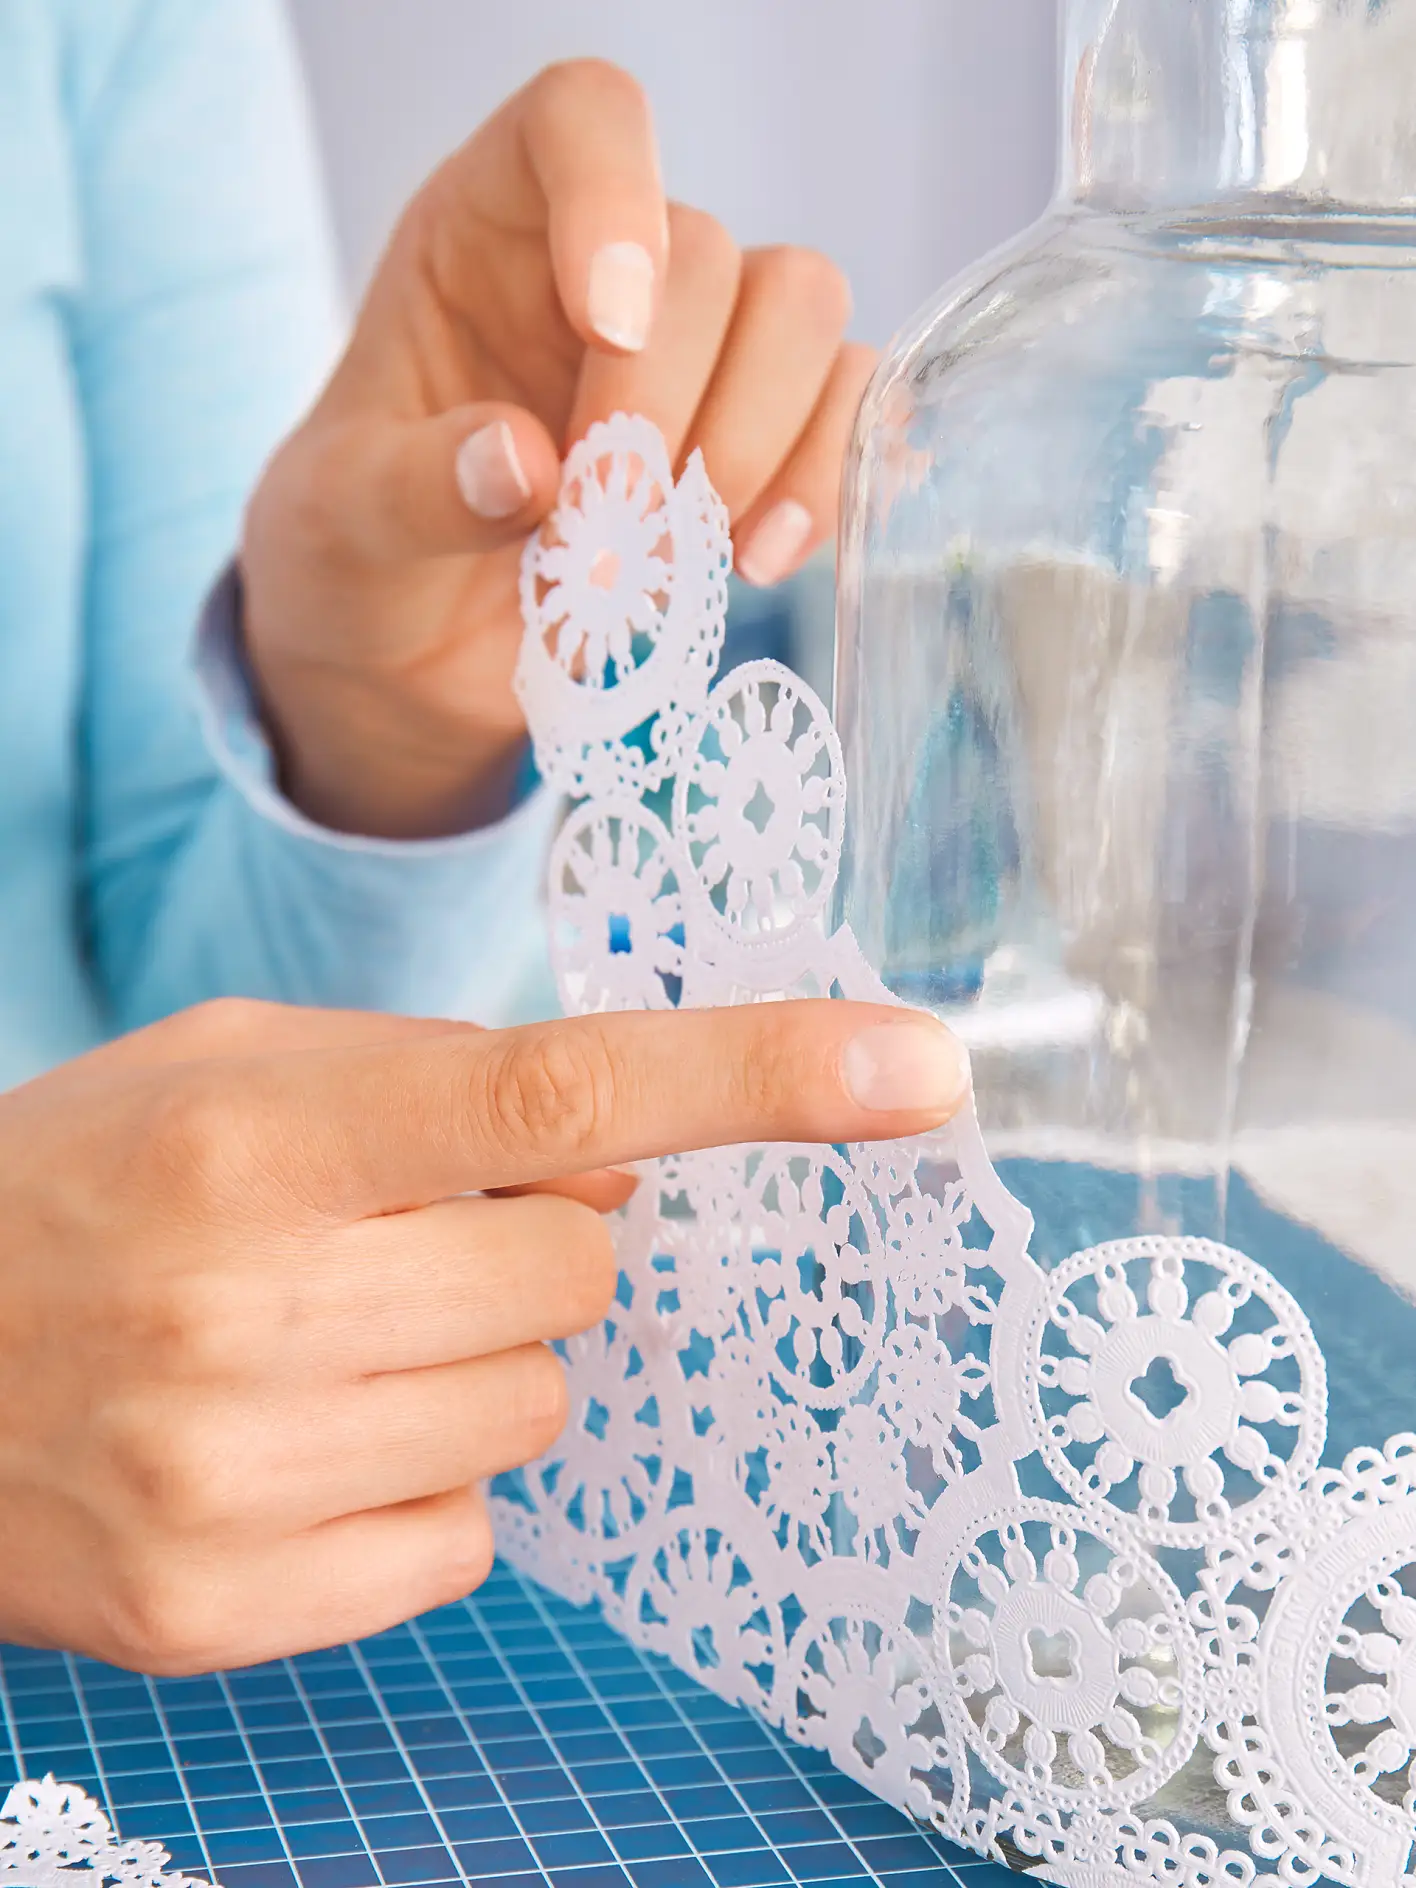 Position and stick the doily to the glass vase to create your own DIY vase